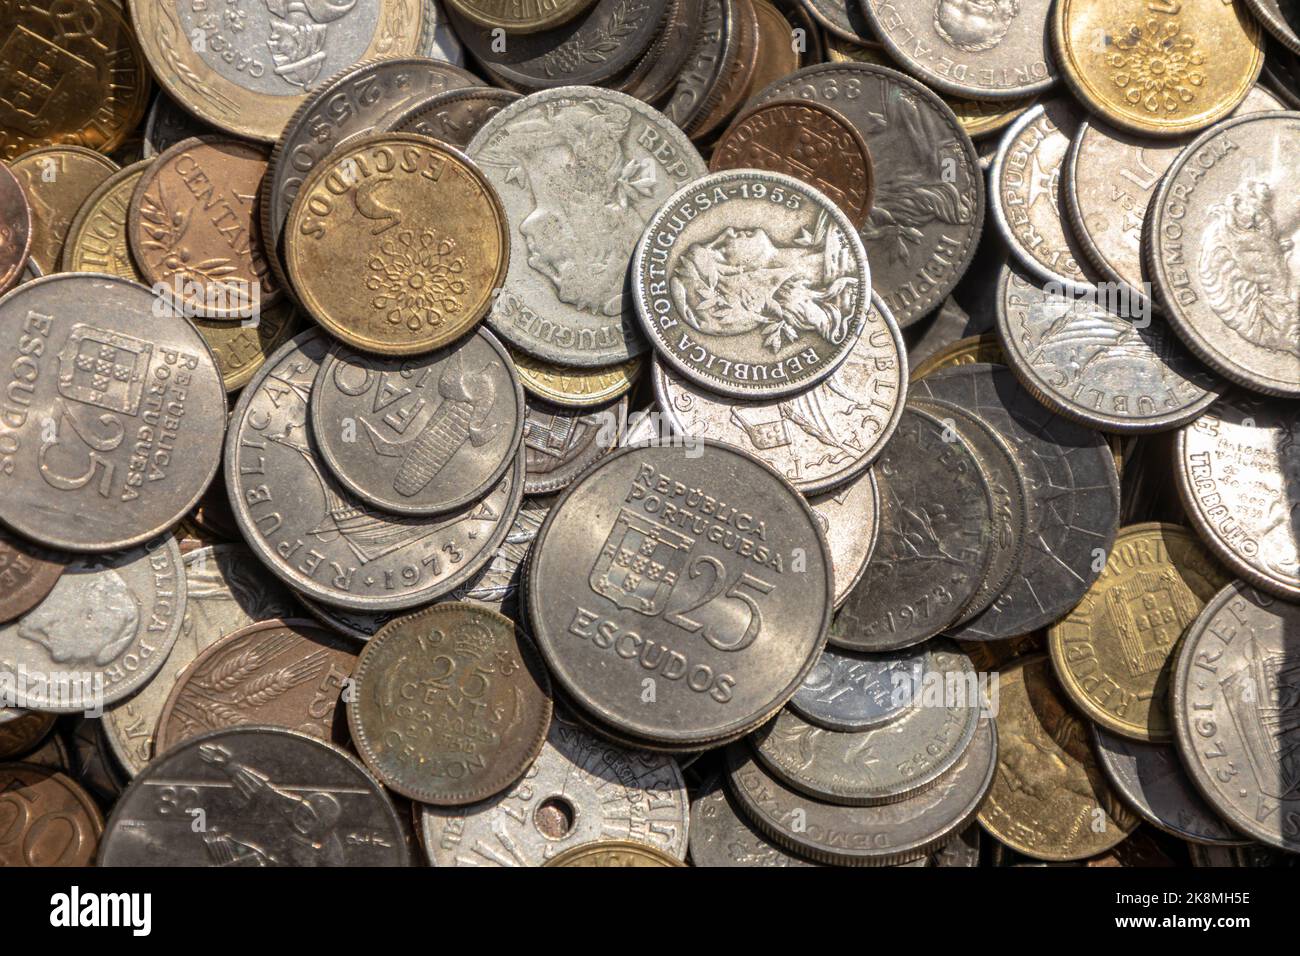 Money & Coins: Photo Gallery